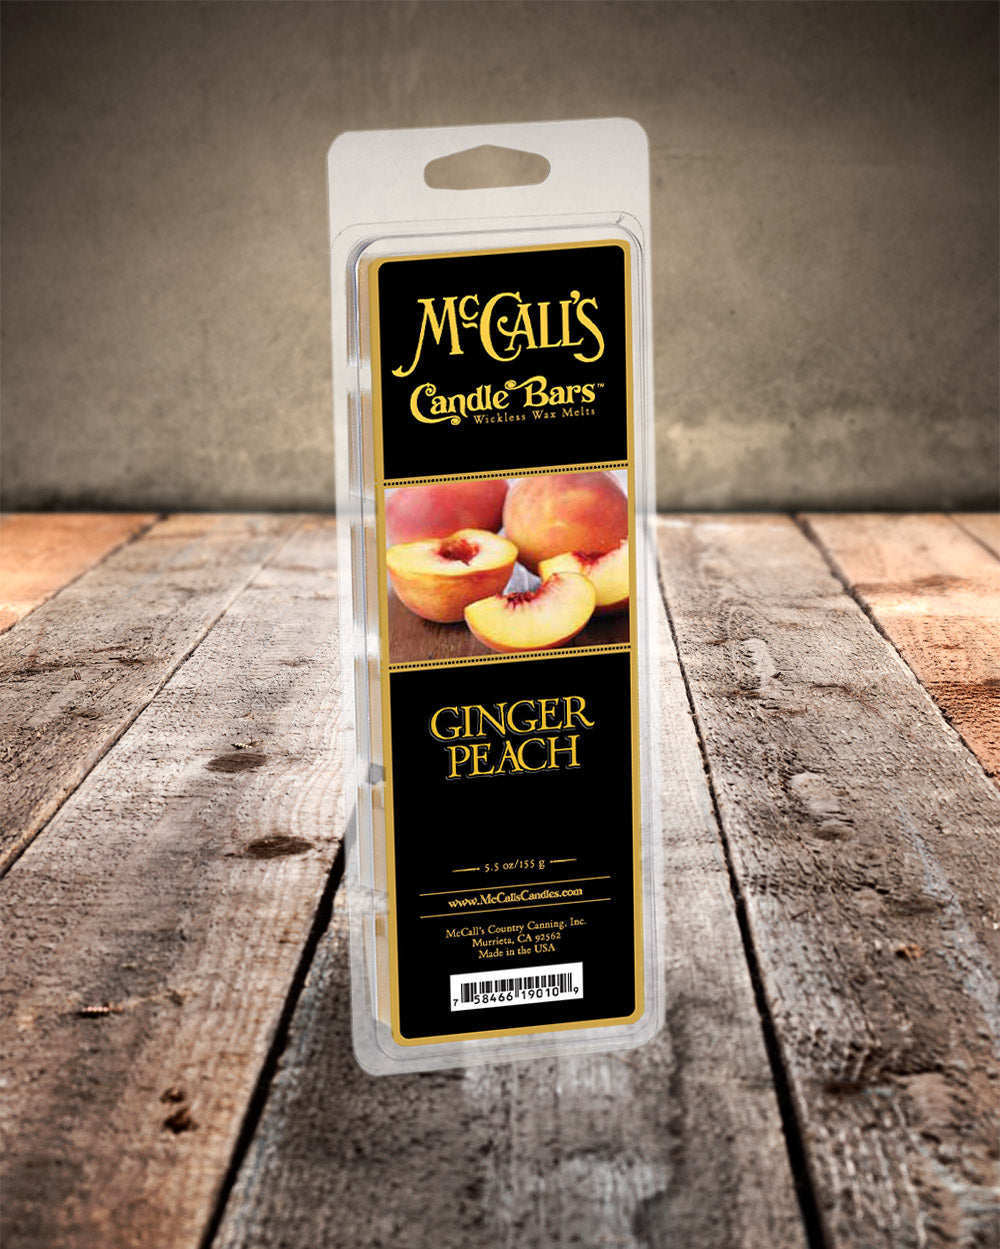 GINGER PEACH Candle Bars-5.5 oz Pack